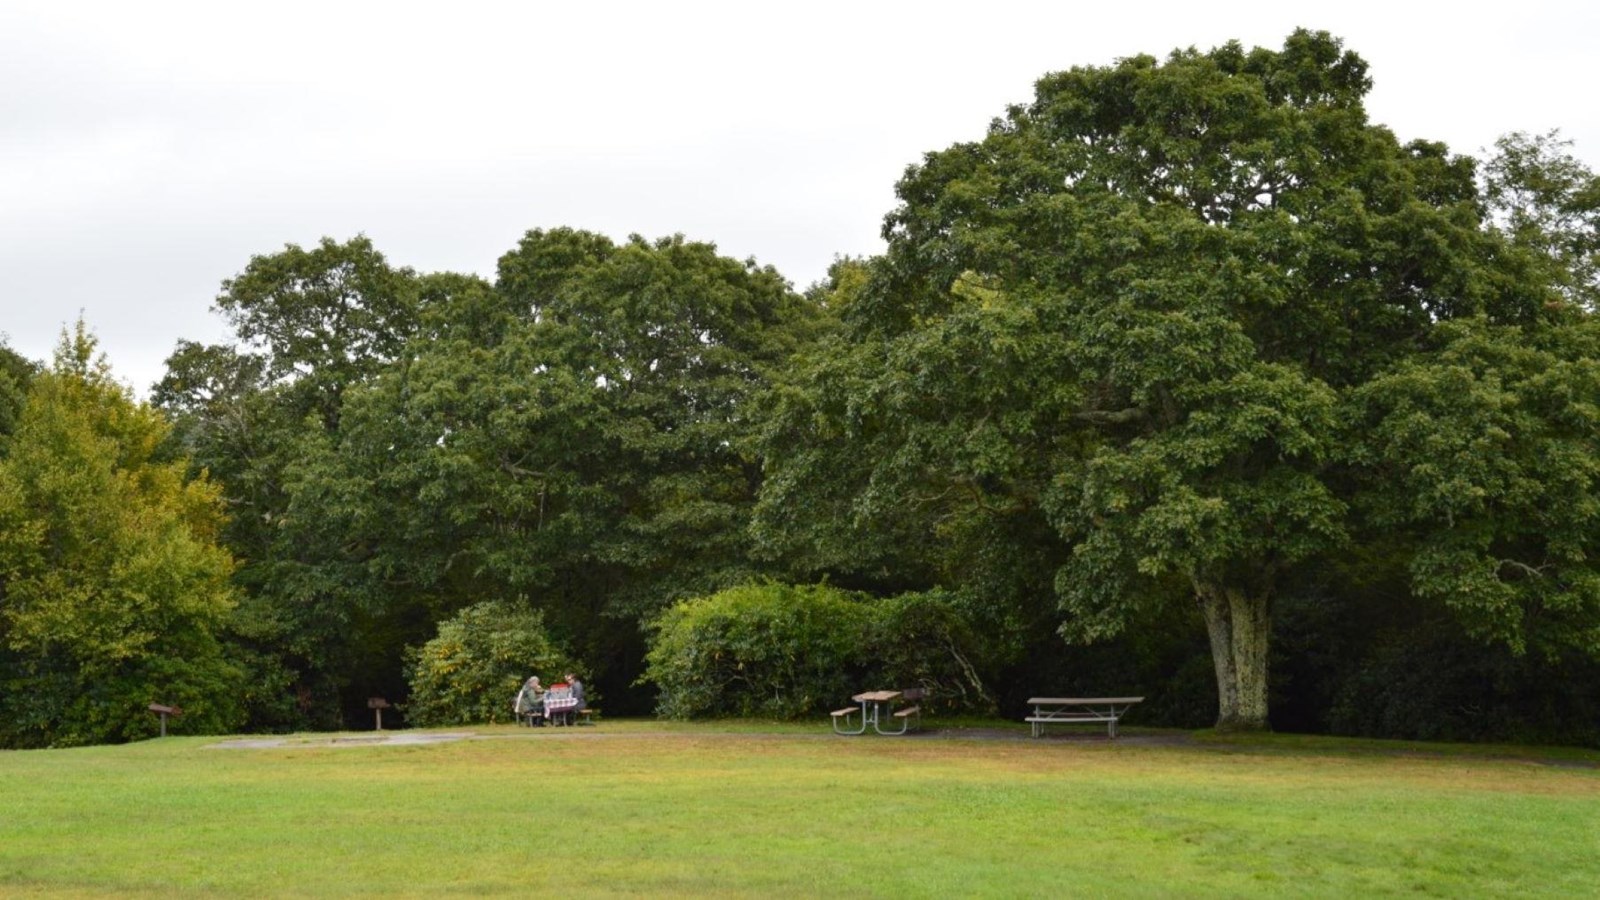 People eating at a picnic table under a large, mature oak tree across a grassy field. 